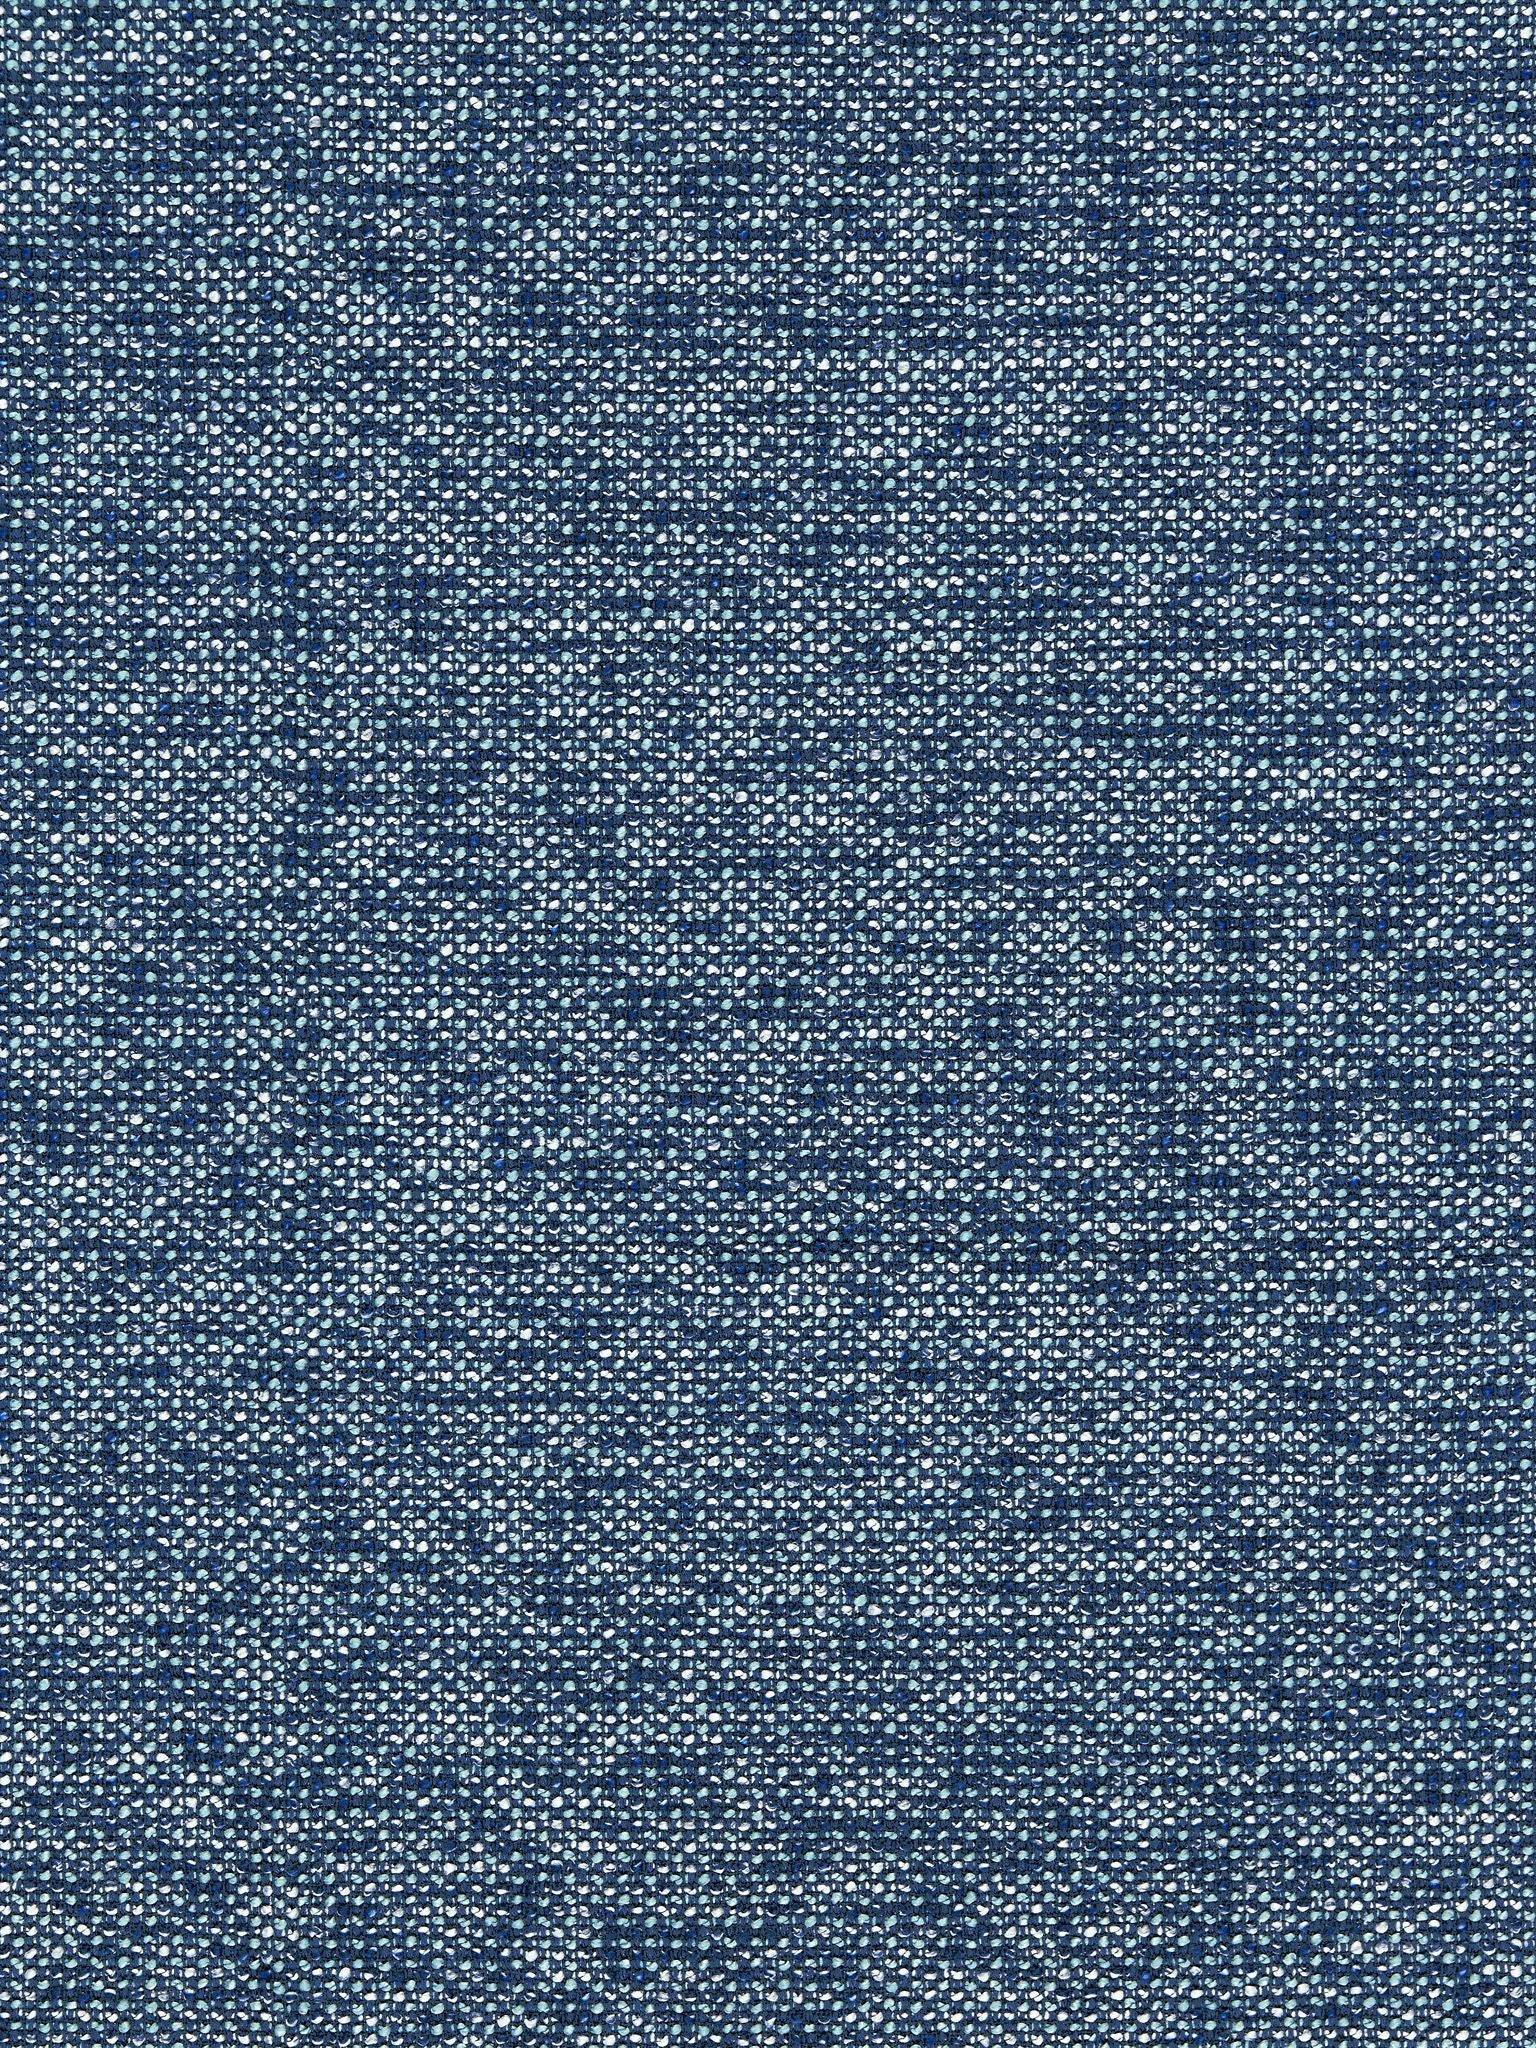 Torrs fabric in ultramarine color - pattern number R7 00010588 - by Scalamandre in the Old World Weavers collection